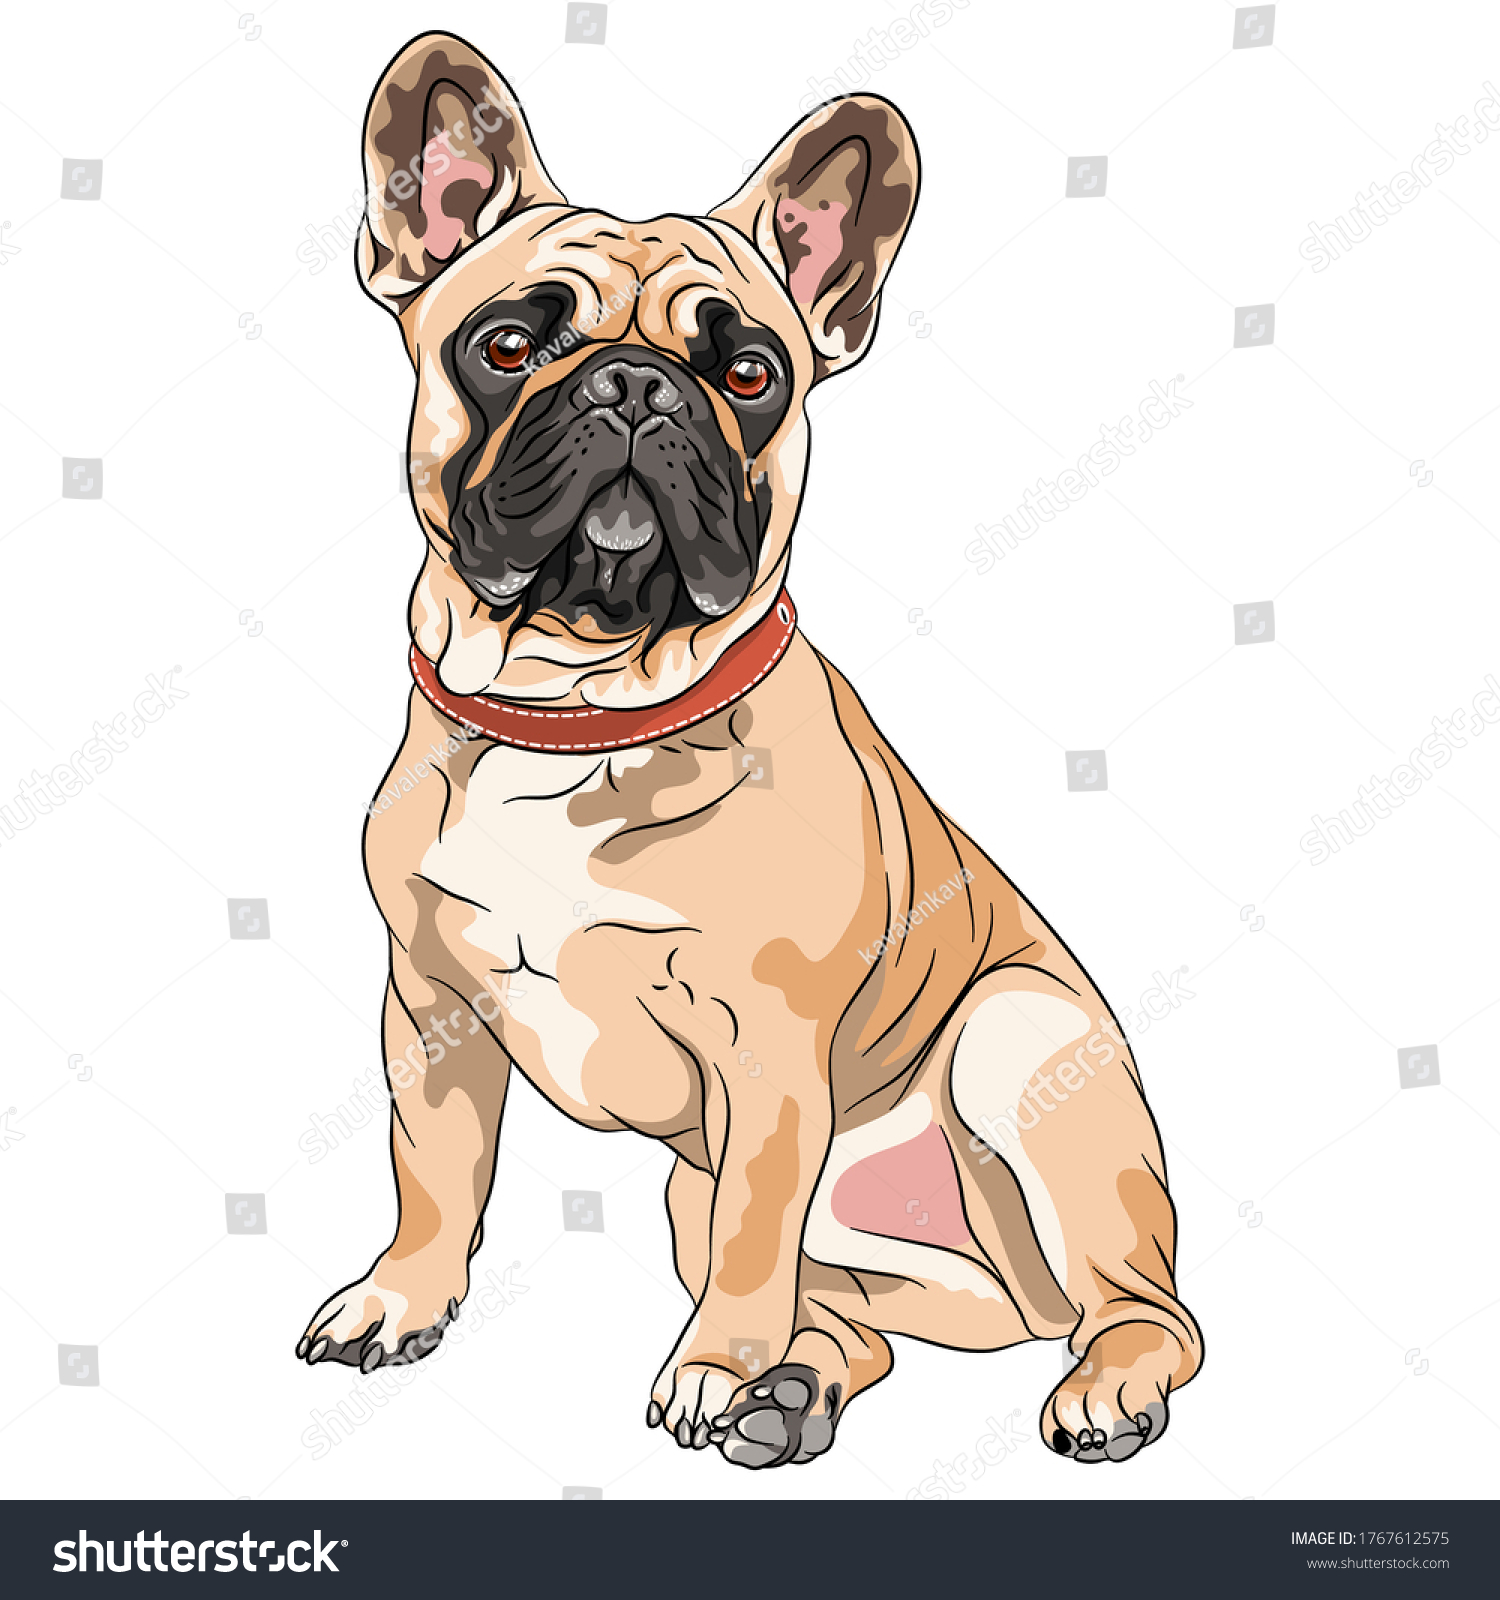 French bulldog drawing Images, Stock Photos & Vectors Shutterstock